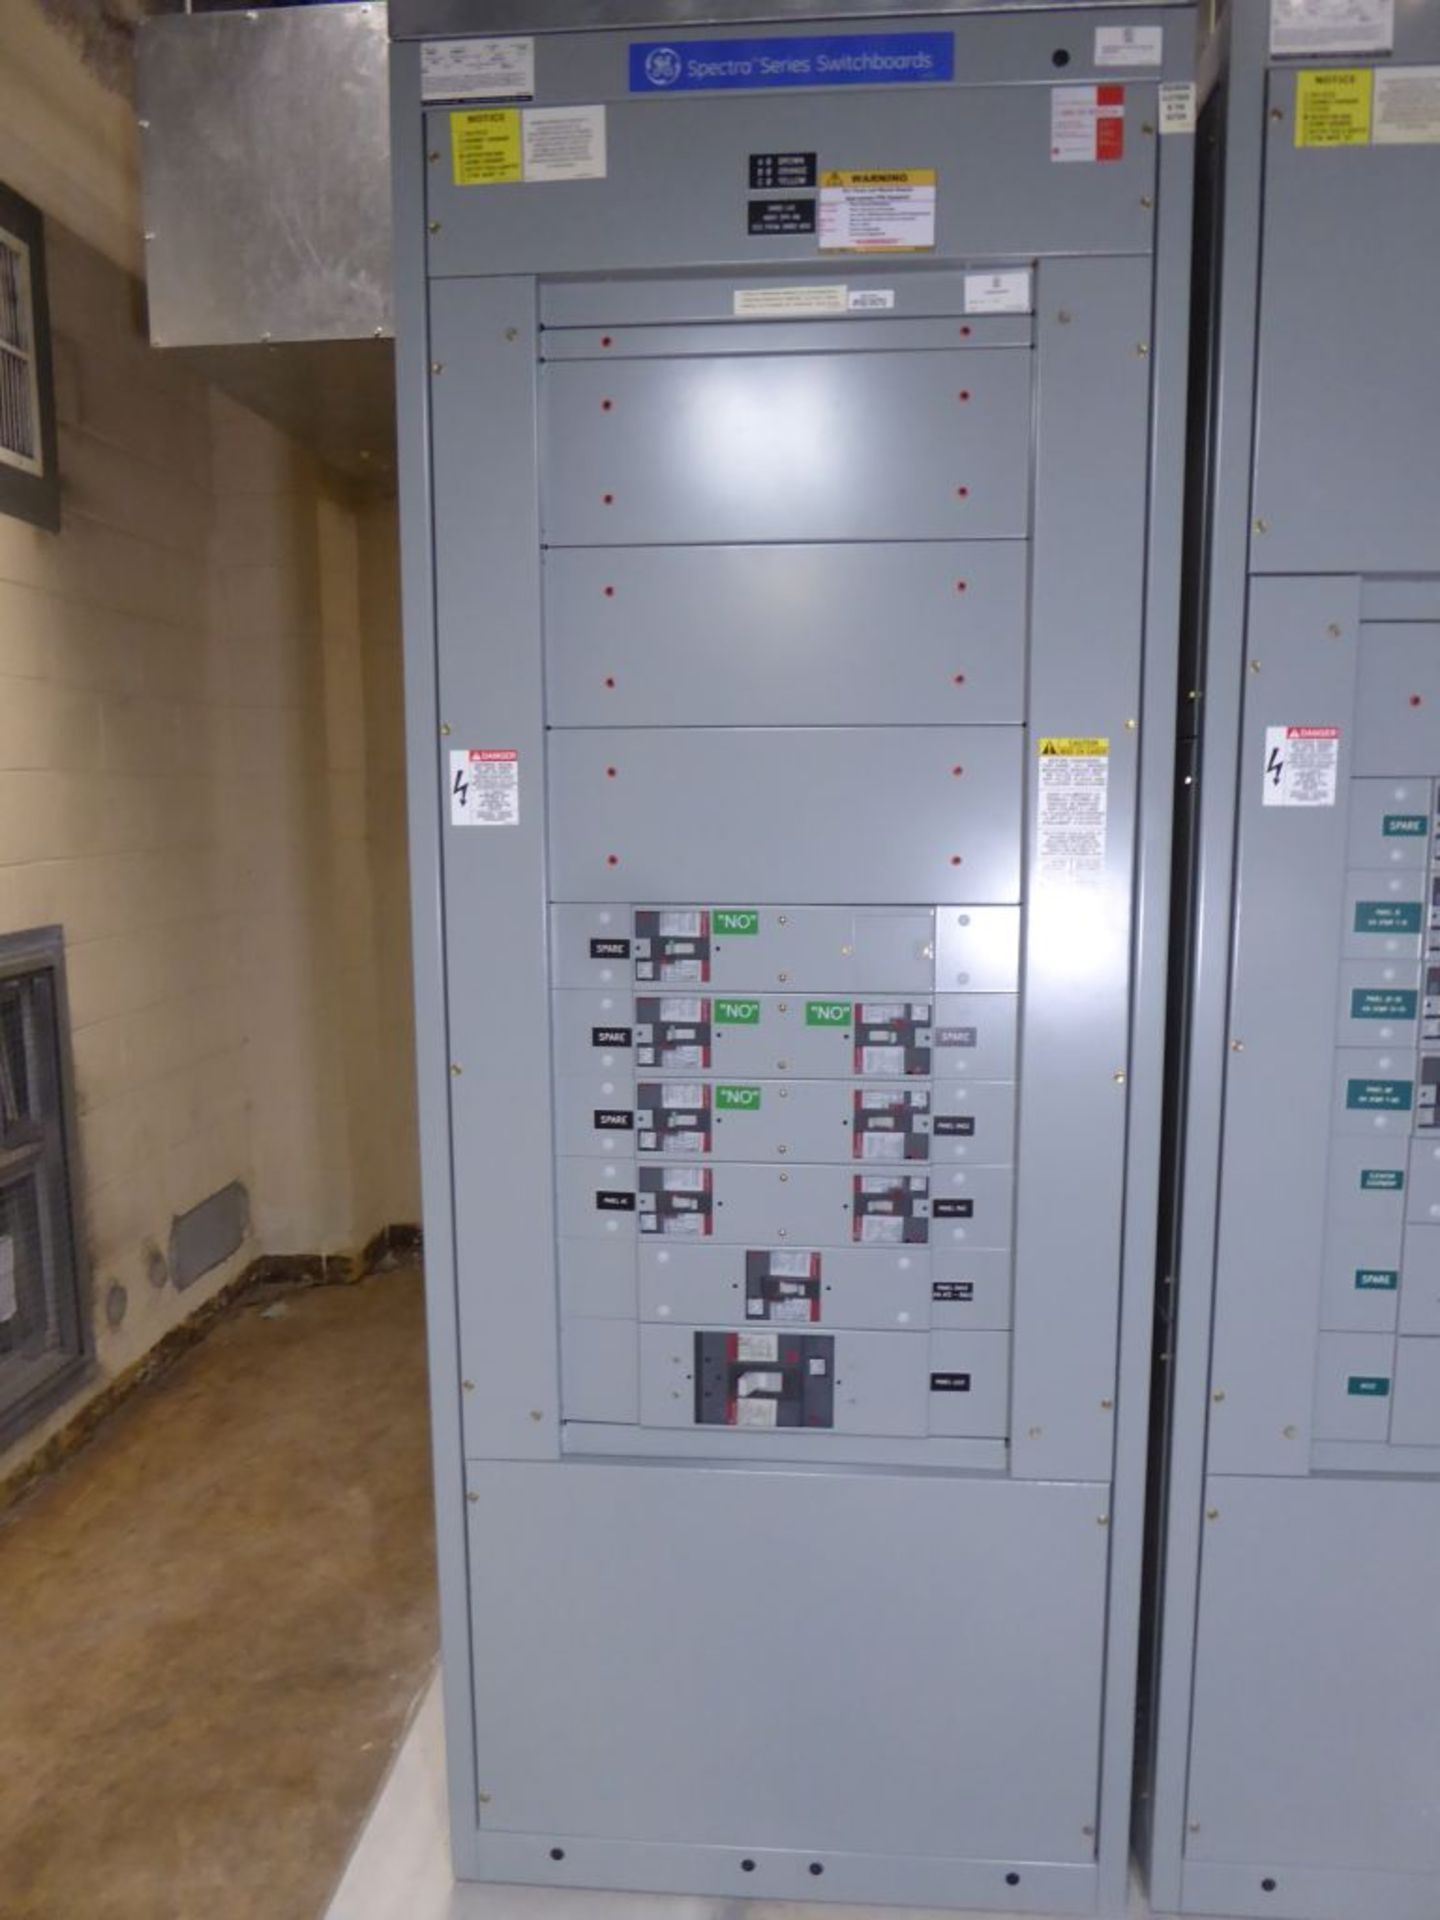 Charlotte, NC - GE 1200A Spectra Series Switchboard